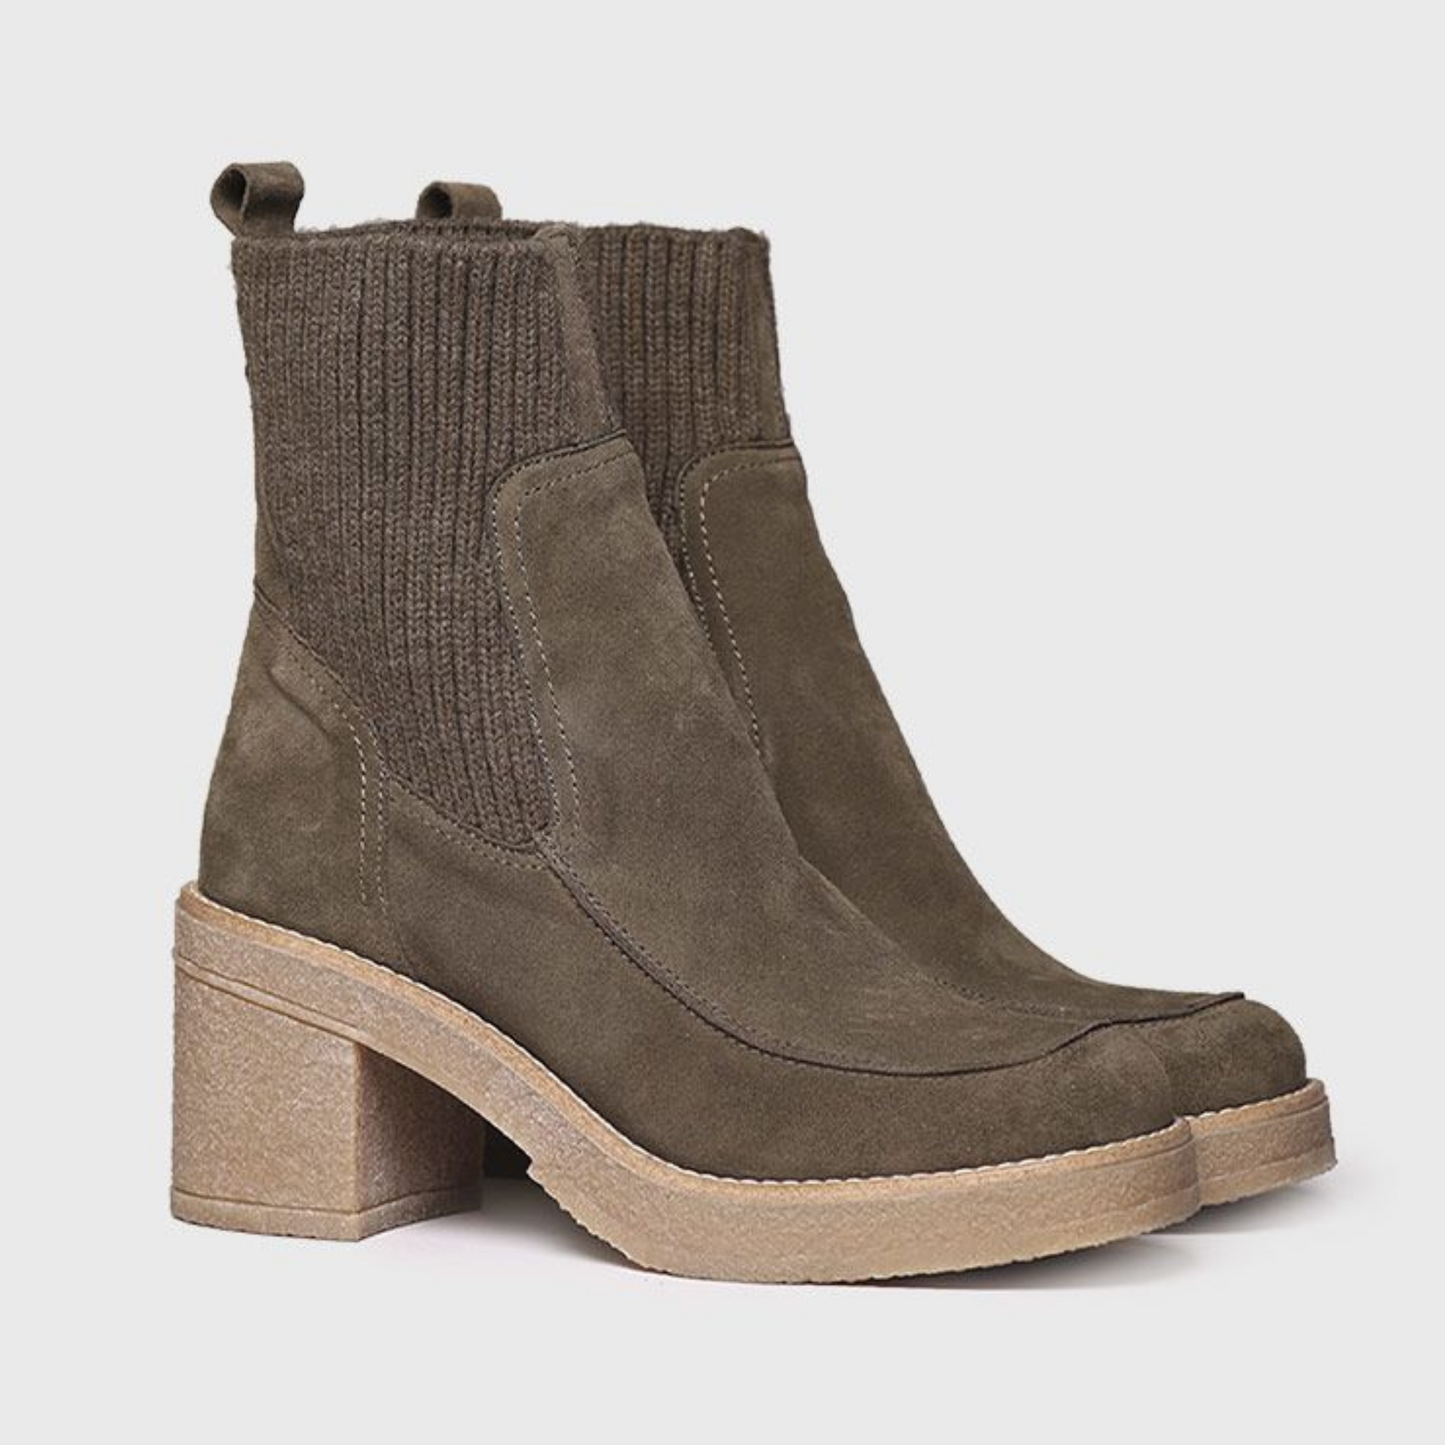 Angled view of of a pair of army green ankle boots with stretchy sock-like shaft